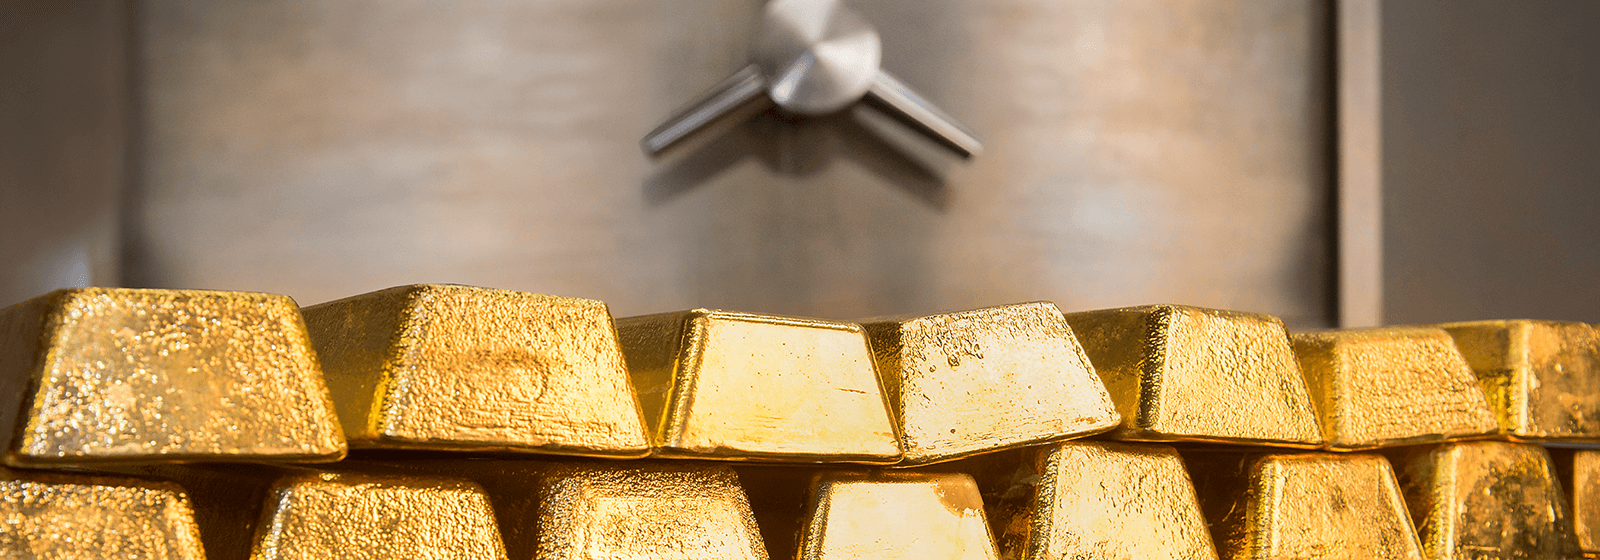 How to safely store gold, silver and platinum